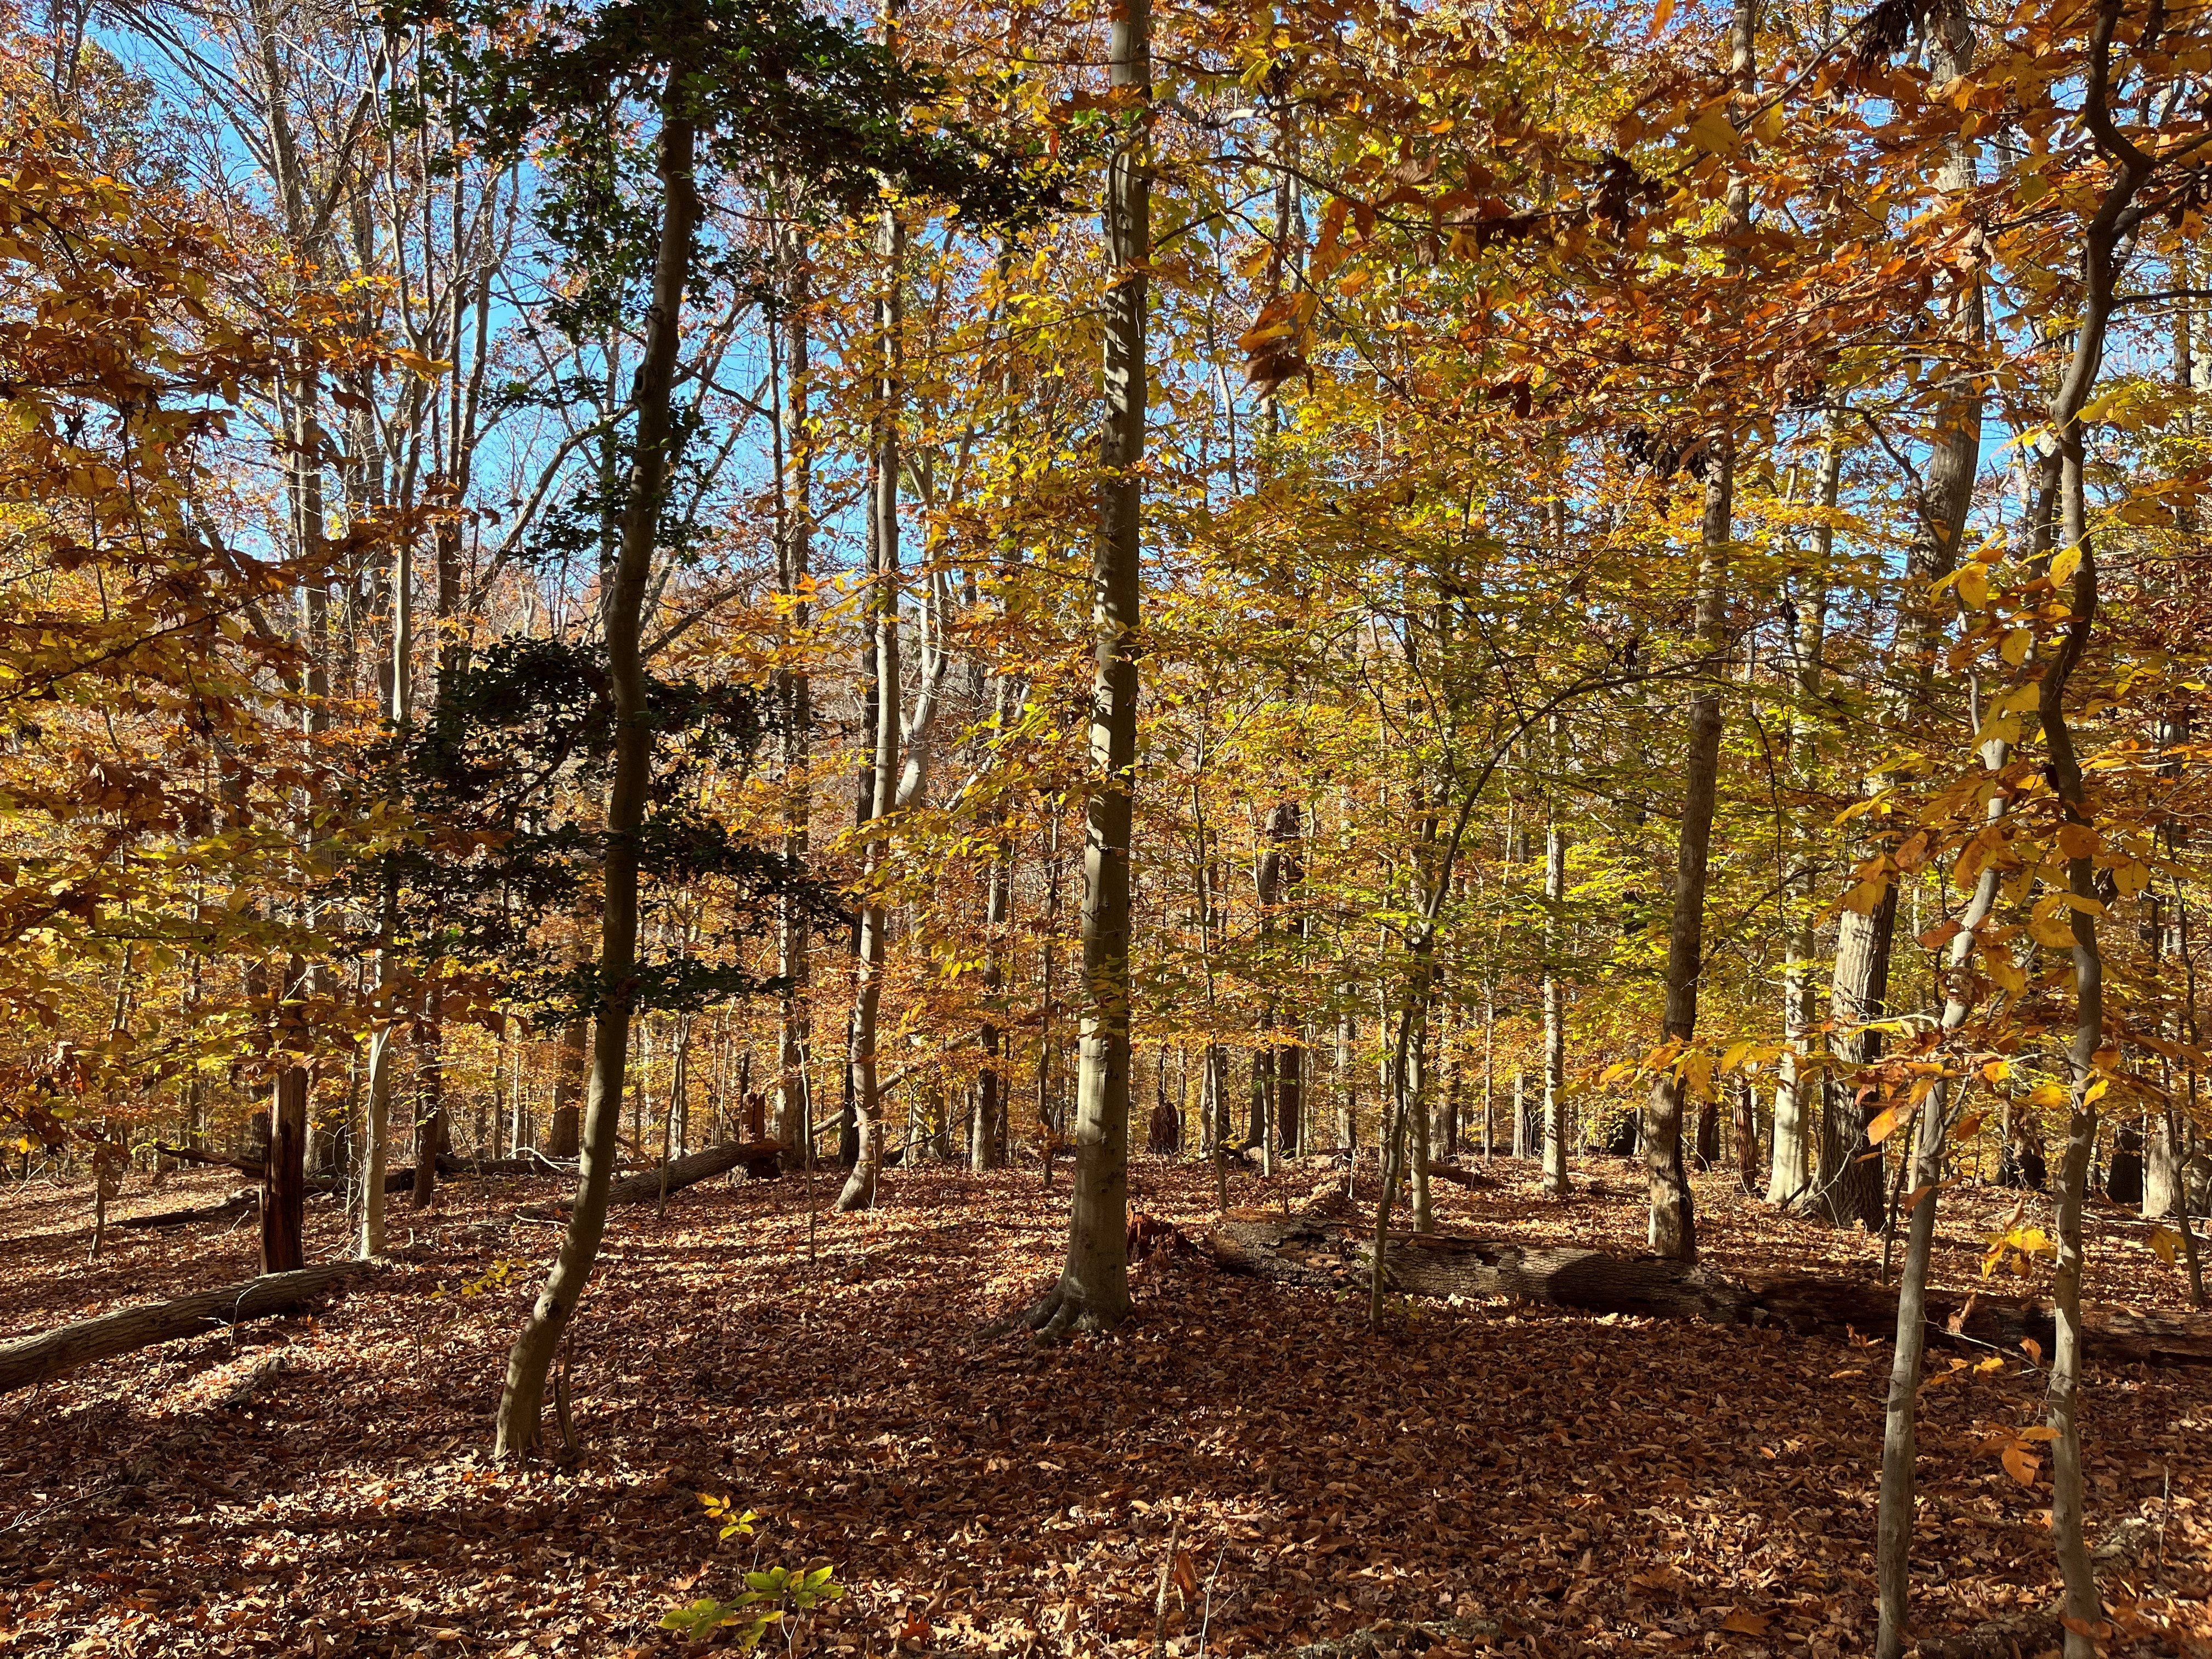 The M-NCPPC, Department of Parks and Recreation, Prince George’s County Finalizes Momentous Acquisition of Over 500 Acres of Forested Land